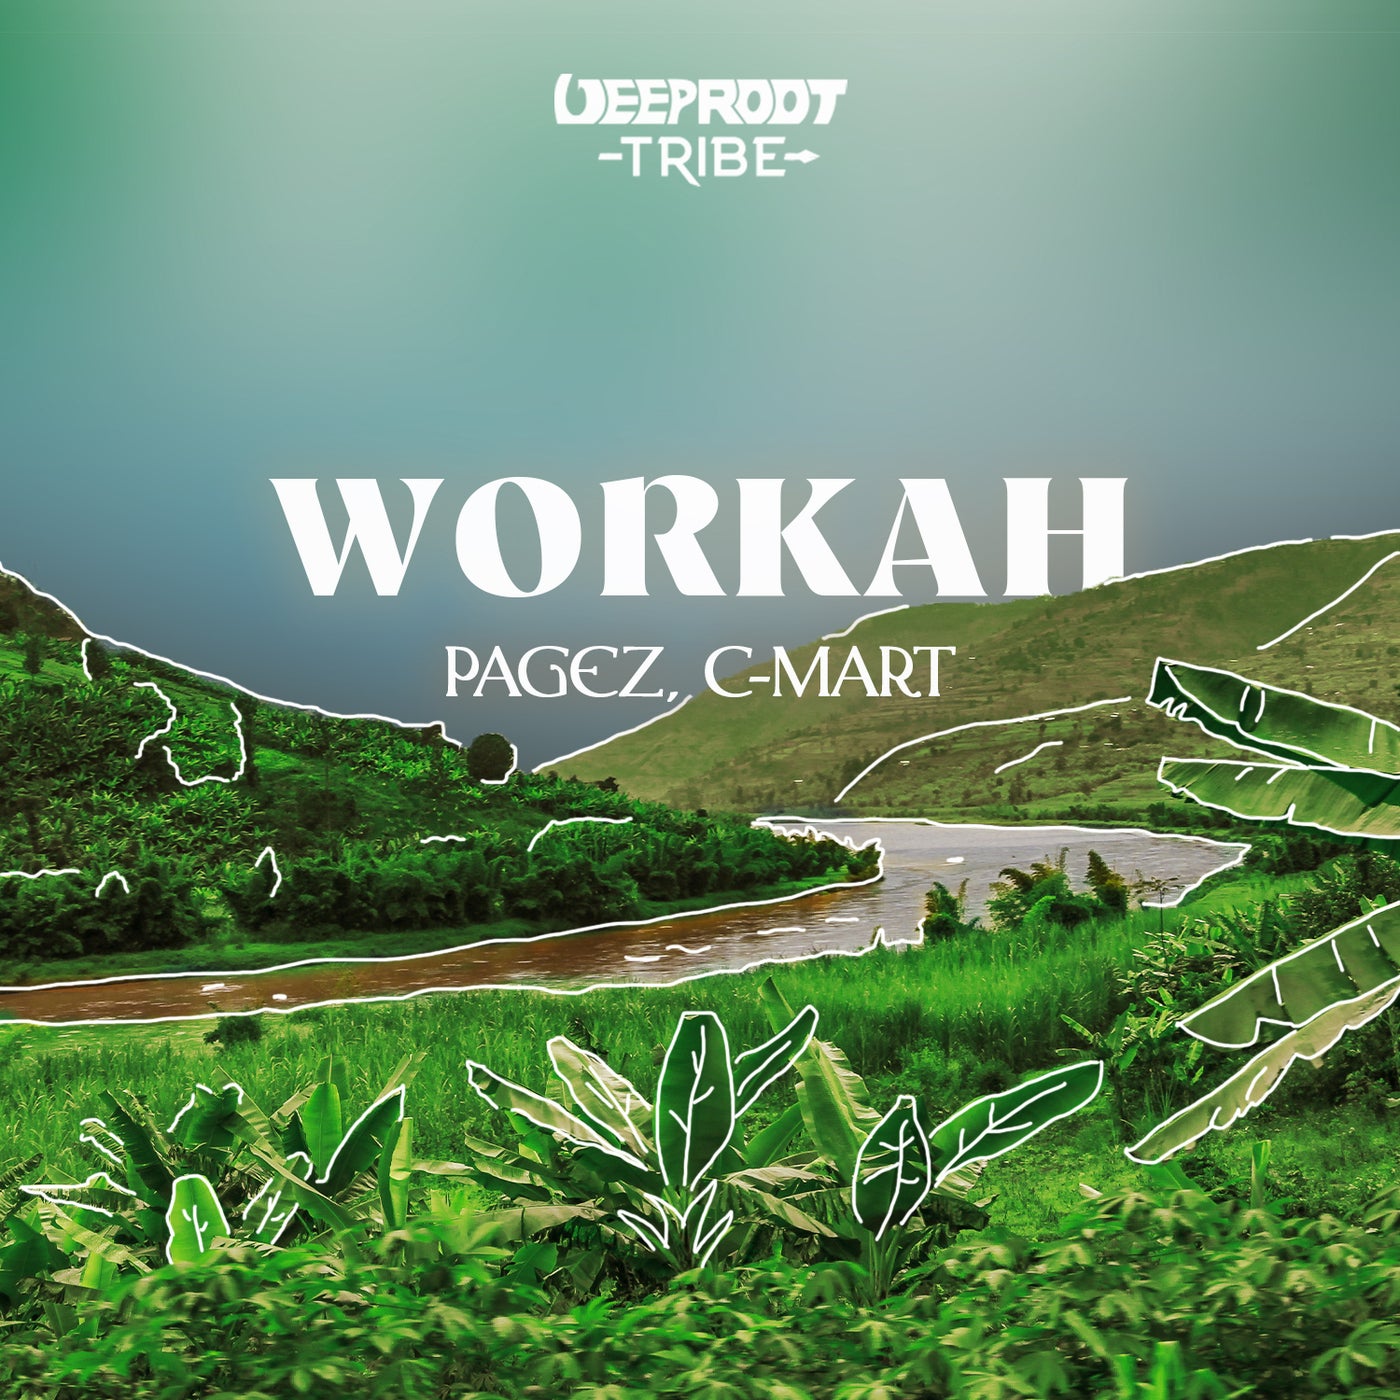 Pagez, Herve Pagez, C-Mart - Workah - Extended Mix on Deep Root Tribe